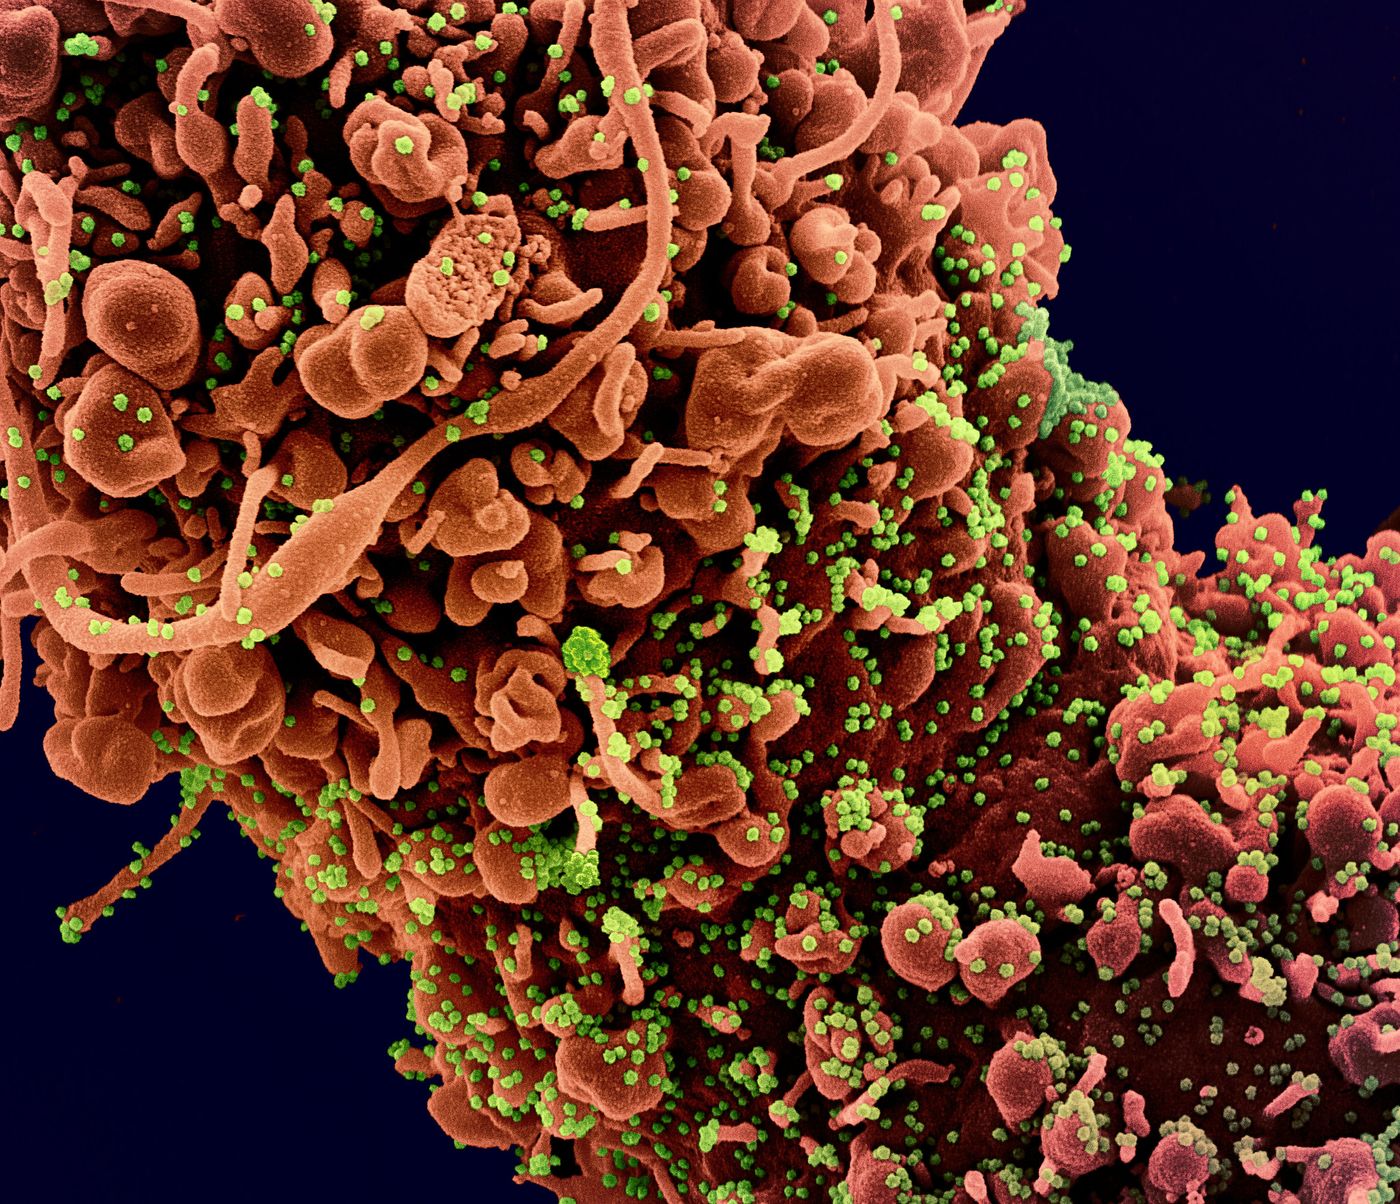 Colorized scanning electron micrograph of a cell showing morphological signs of apoptosis, infected with SARS-COV-2 virus particles (green), isolated from a patient sample. Image captured at the NIAID Integrated Research Facility (IRF) in Fort Detrick, Maryland. / Credit: NIAID